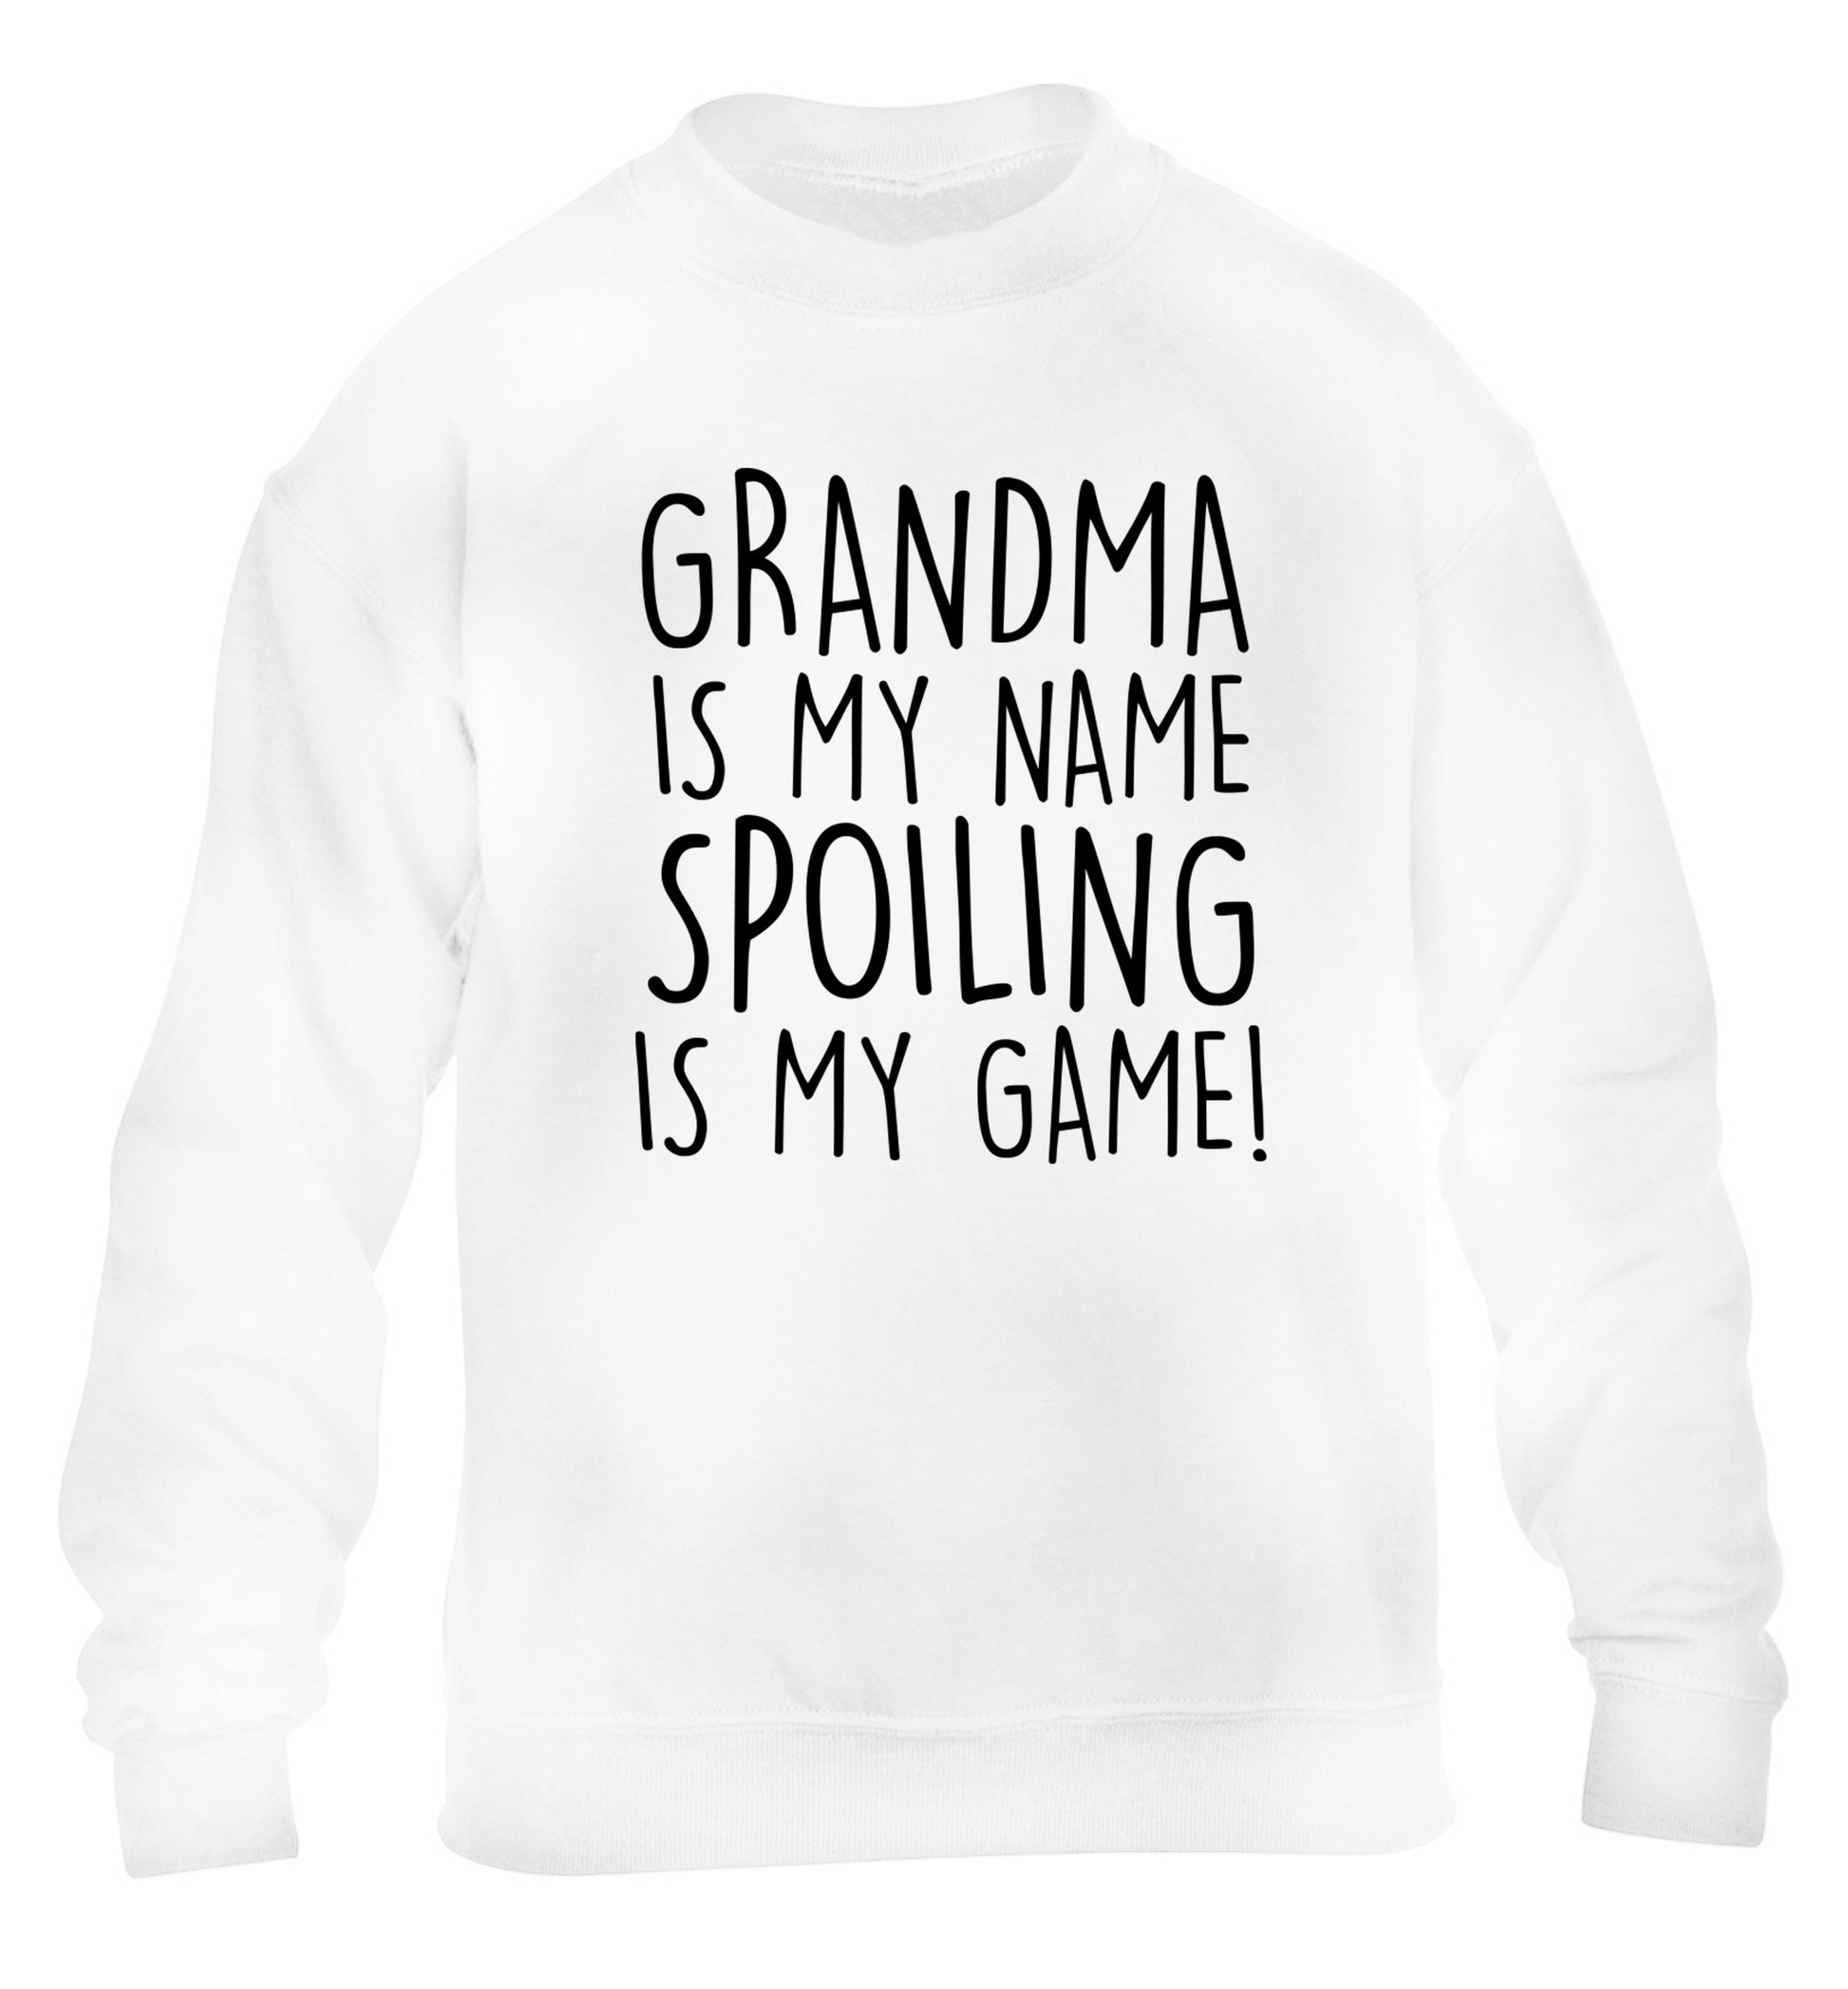 Grandma is my name, spoiling is my game children's white sweater 12-14 Years